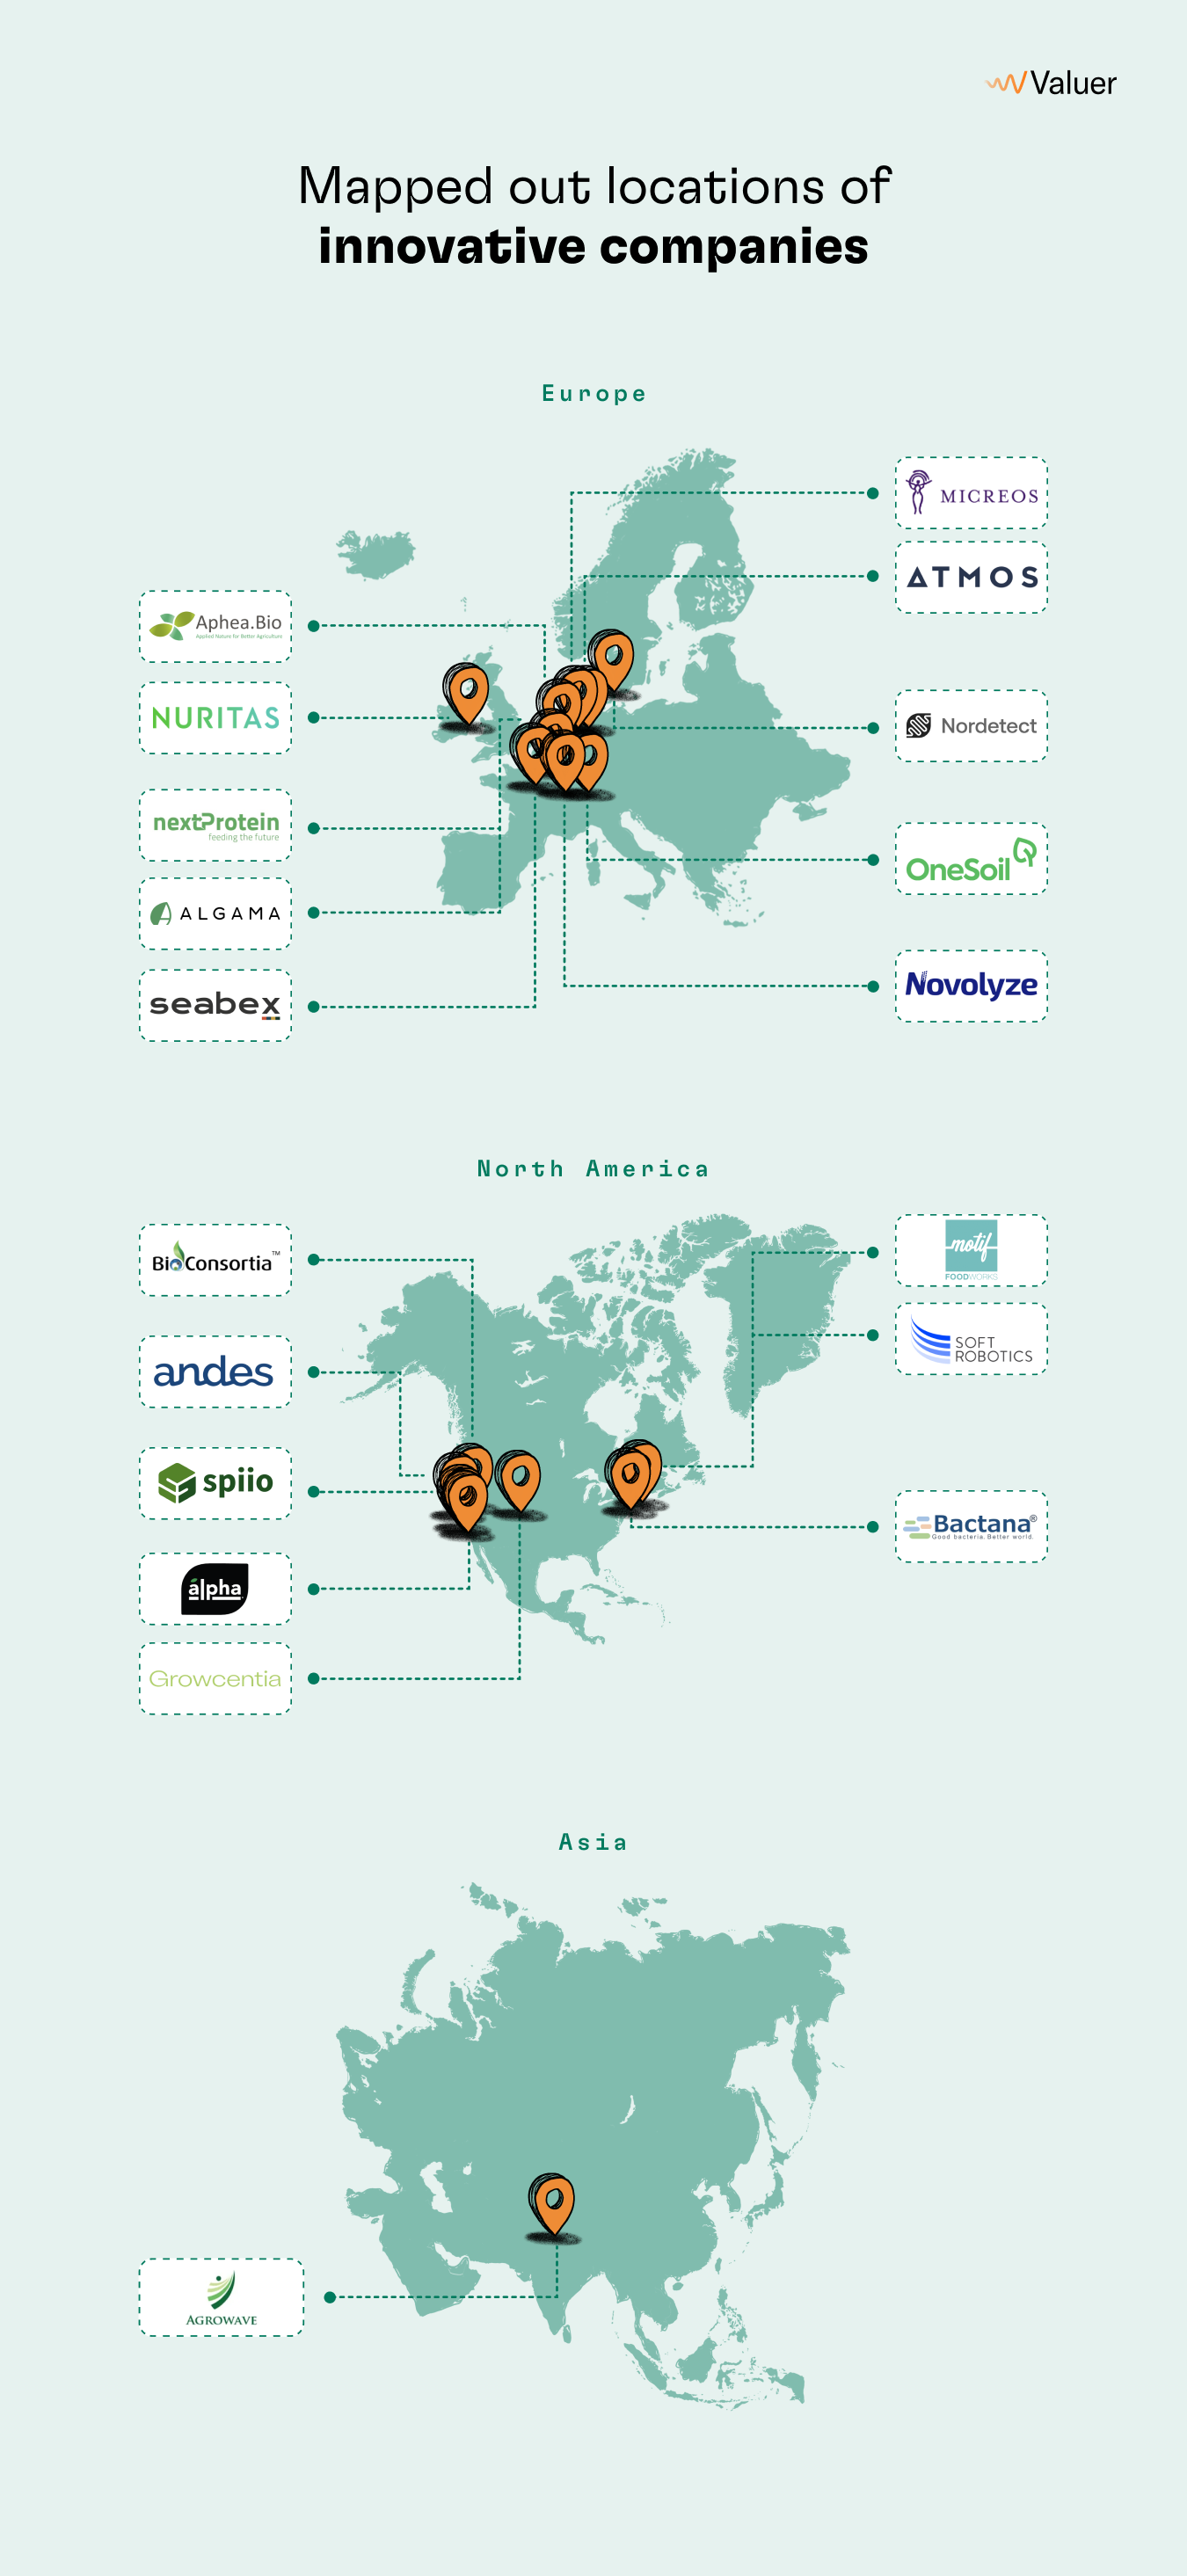 Mapped out locations of innovative companies